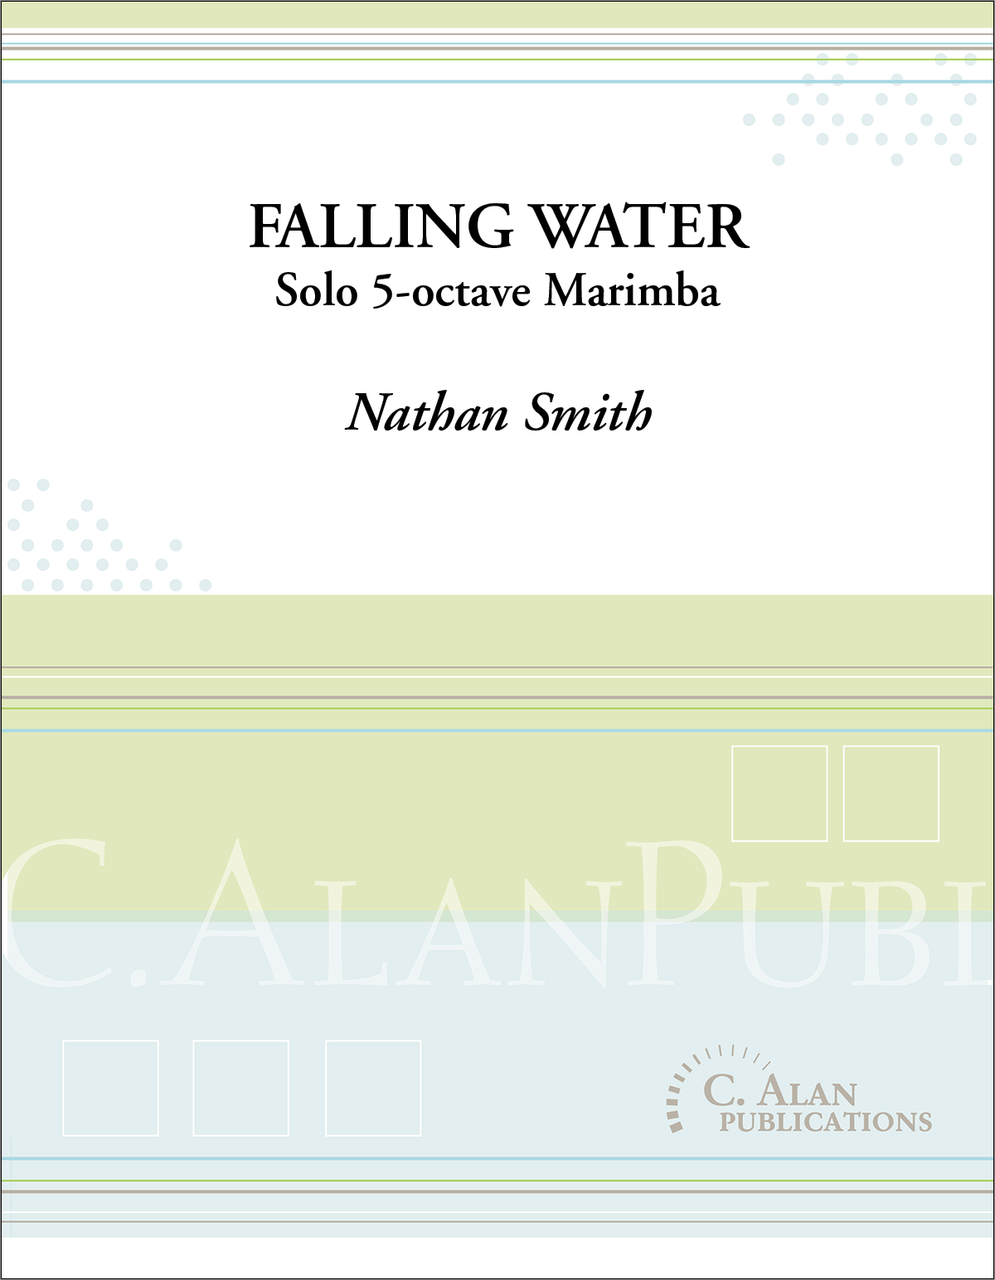 Falling Water by Nathan Smith